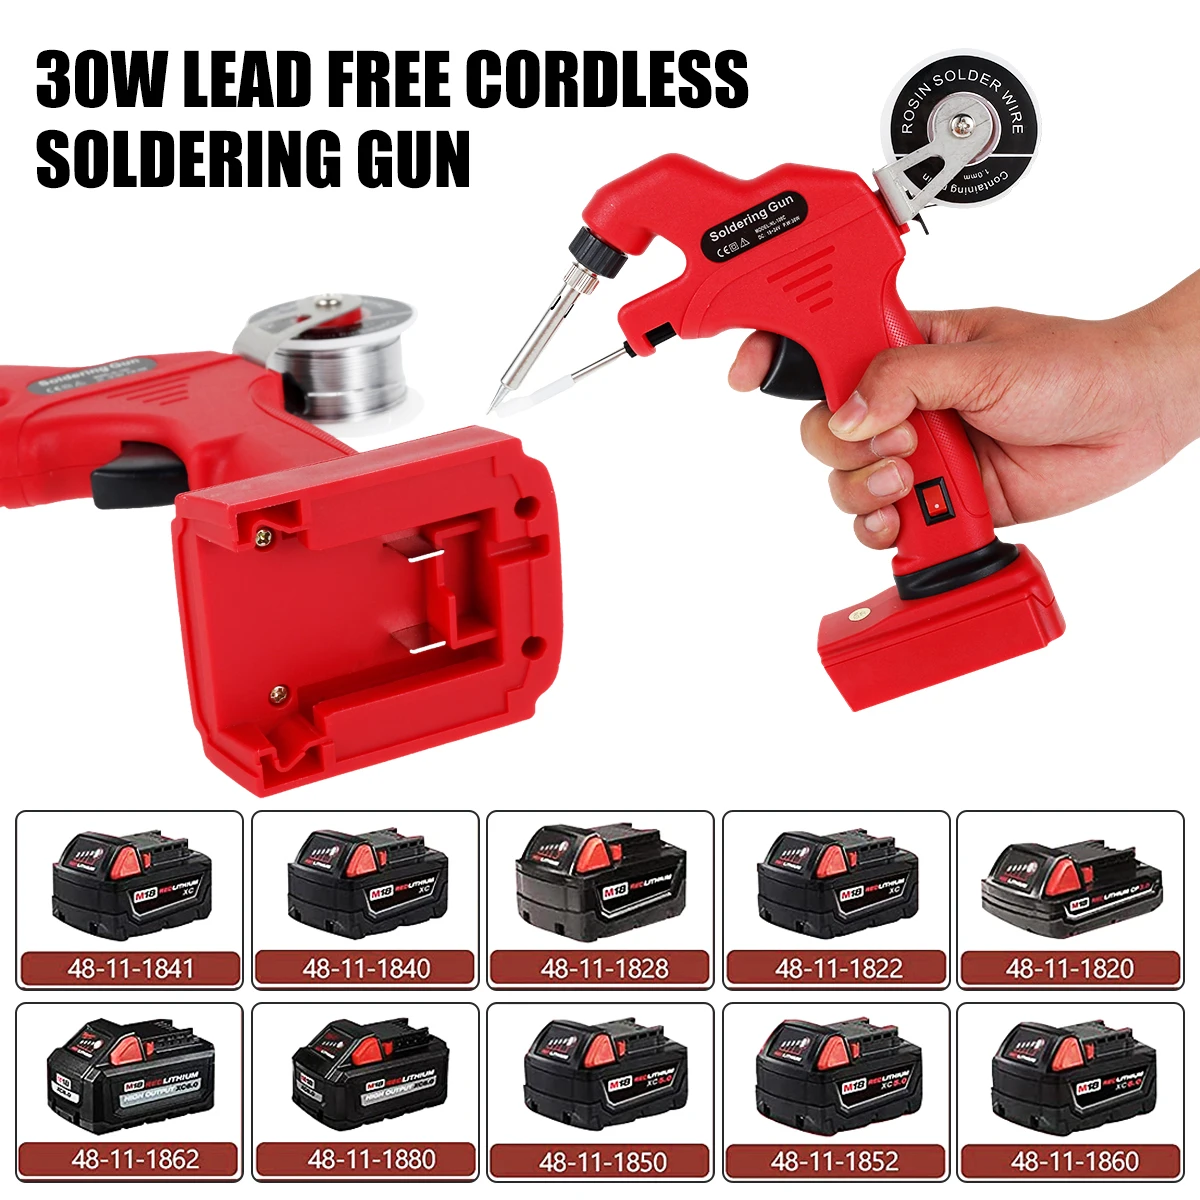 

Hot Cordless Electric Soldering Iron Kit Portable Automatically Send Tin Welding Gun Repair Power Tool For Milwaukee Battery